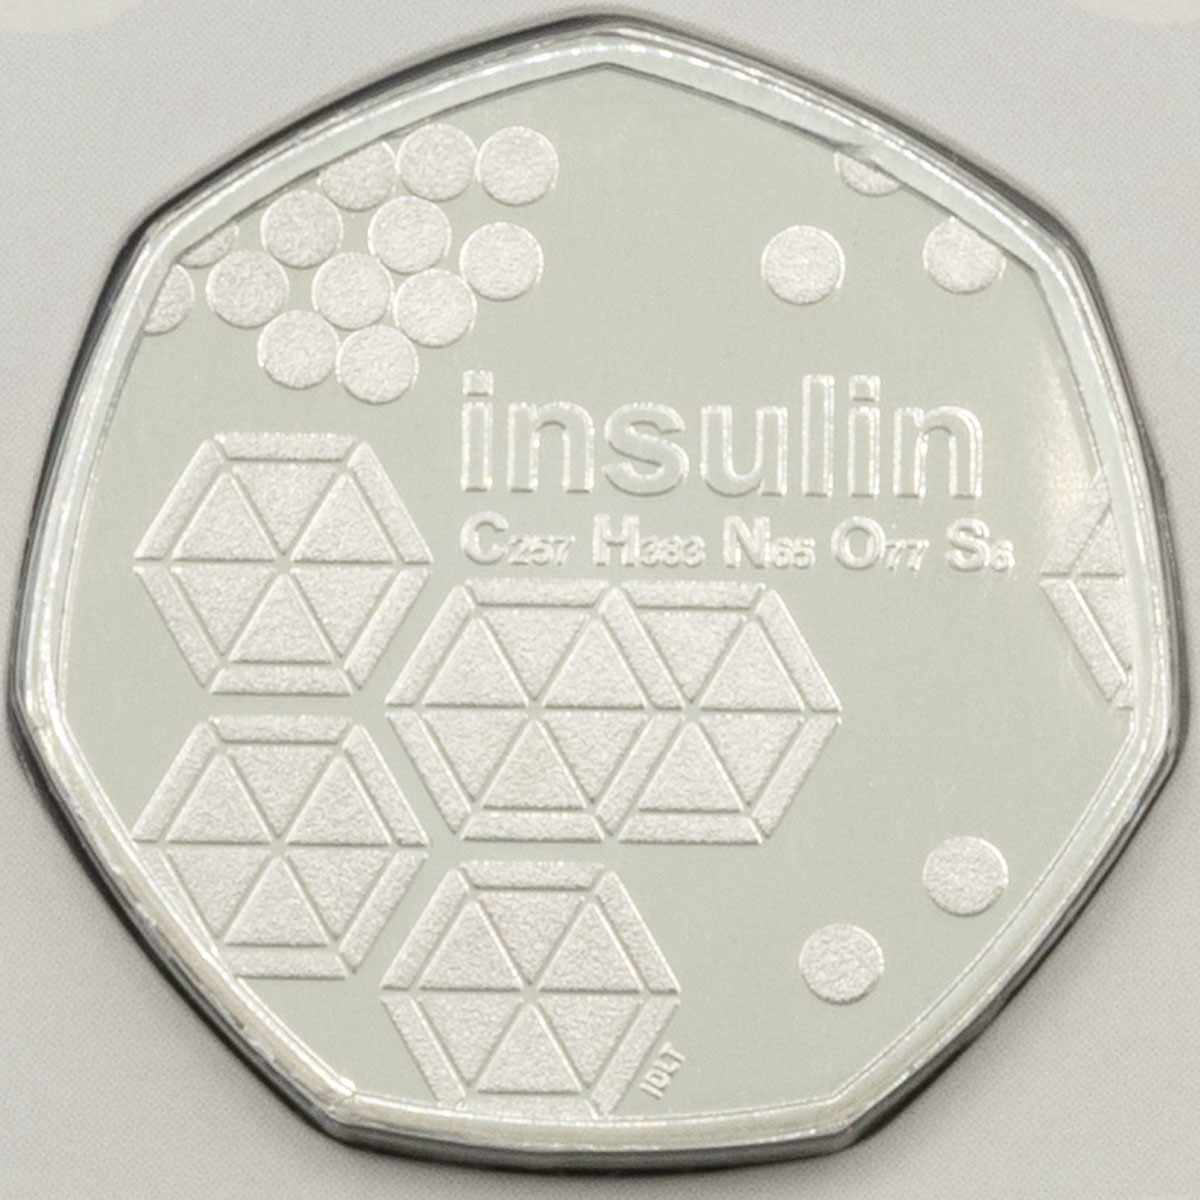 UK21DIBU 2021 Innovation In Science 100 Years Discovery Of Insulin Fifty Pence Brilliant Uncirculated Coin In Folder Reverse